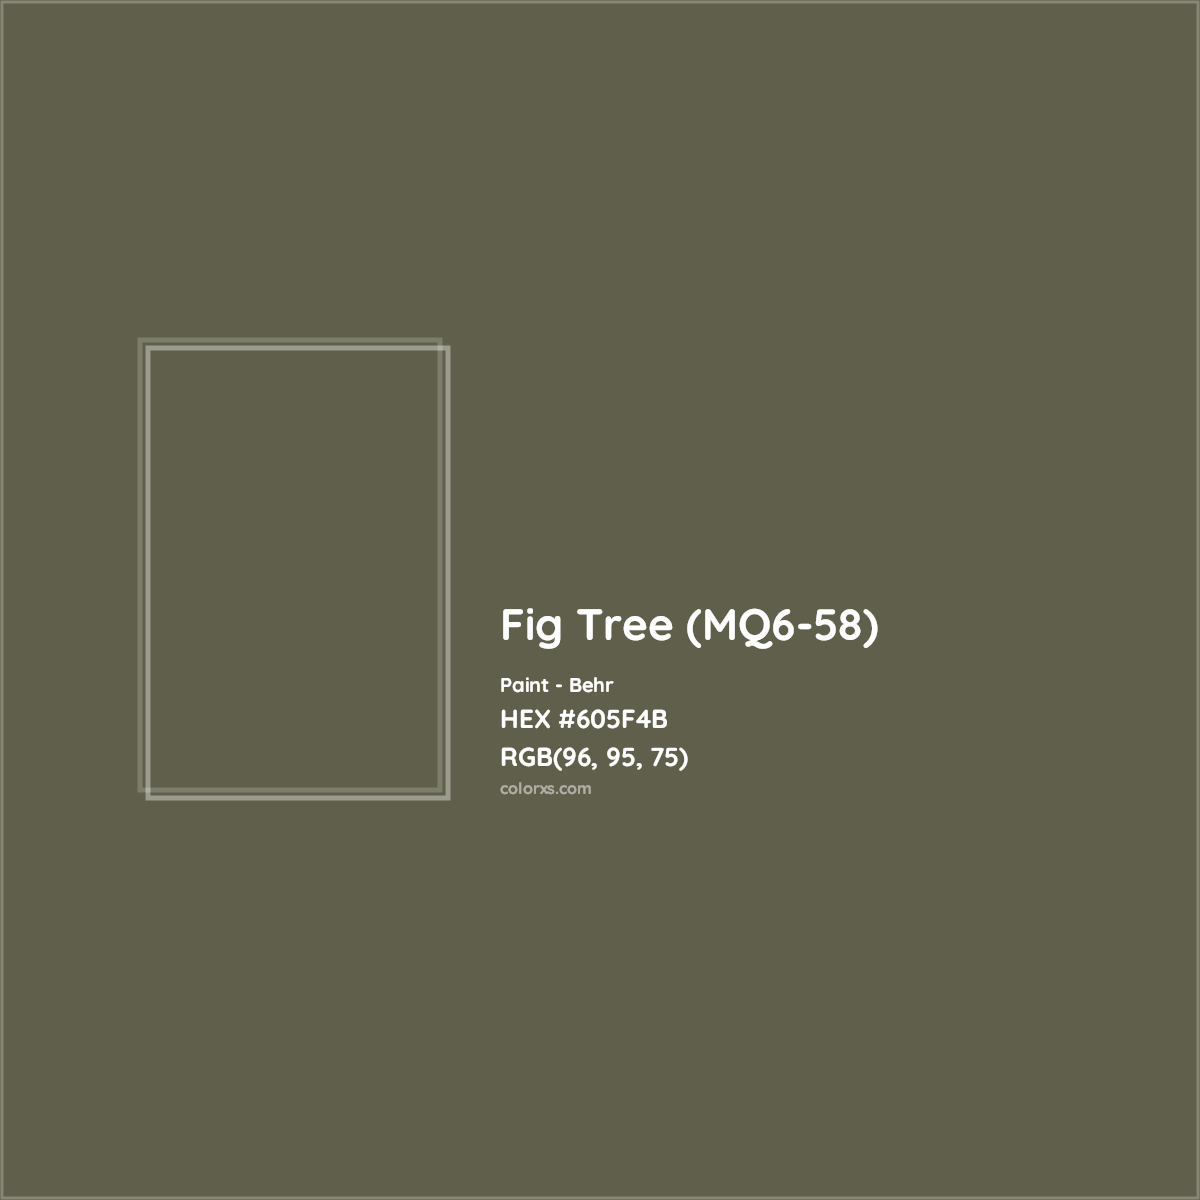 HEX #605F4B Fig Tree (MQ6-58) Paint Behr - Color Code